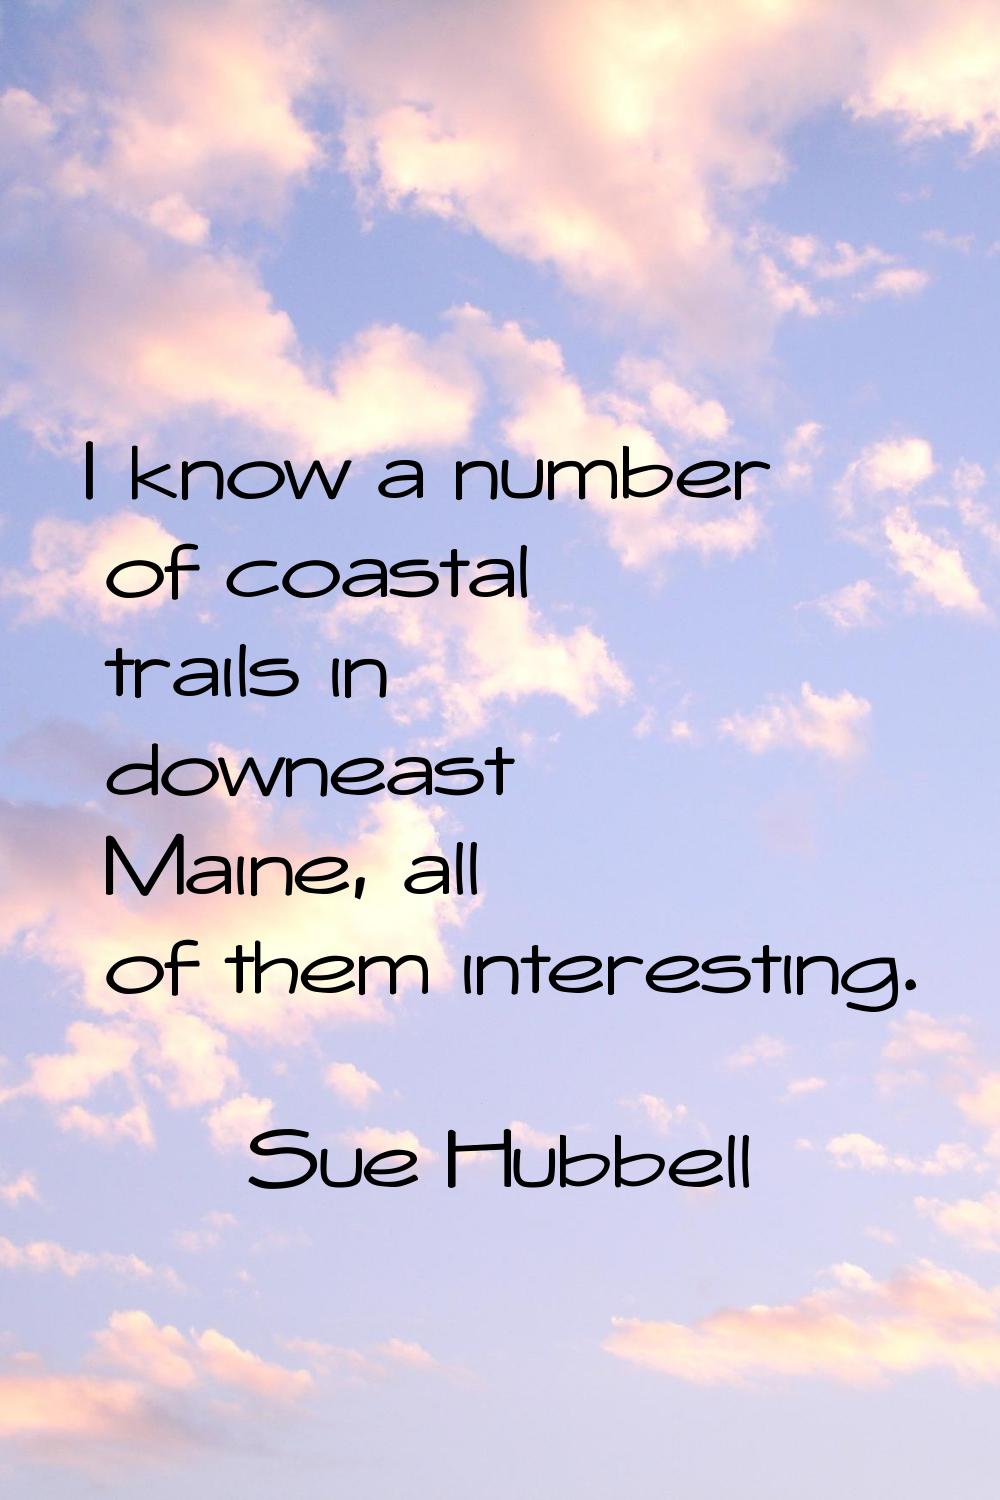 I know a number of coastal trails in downeast Maine, all of them interesting.